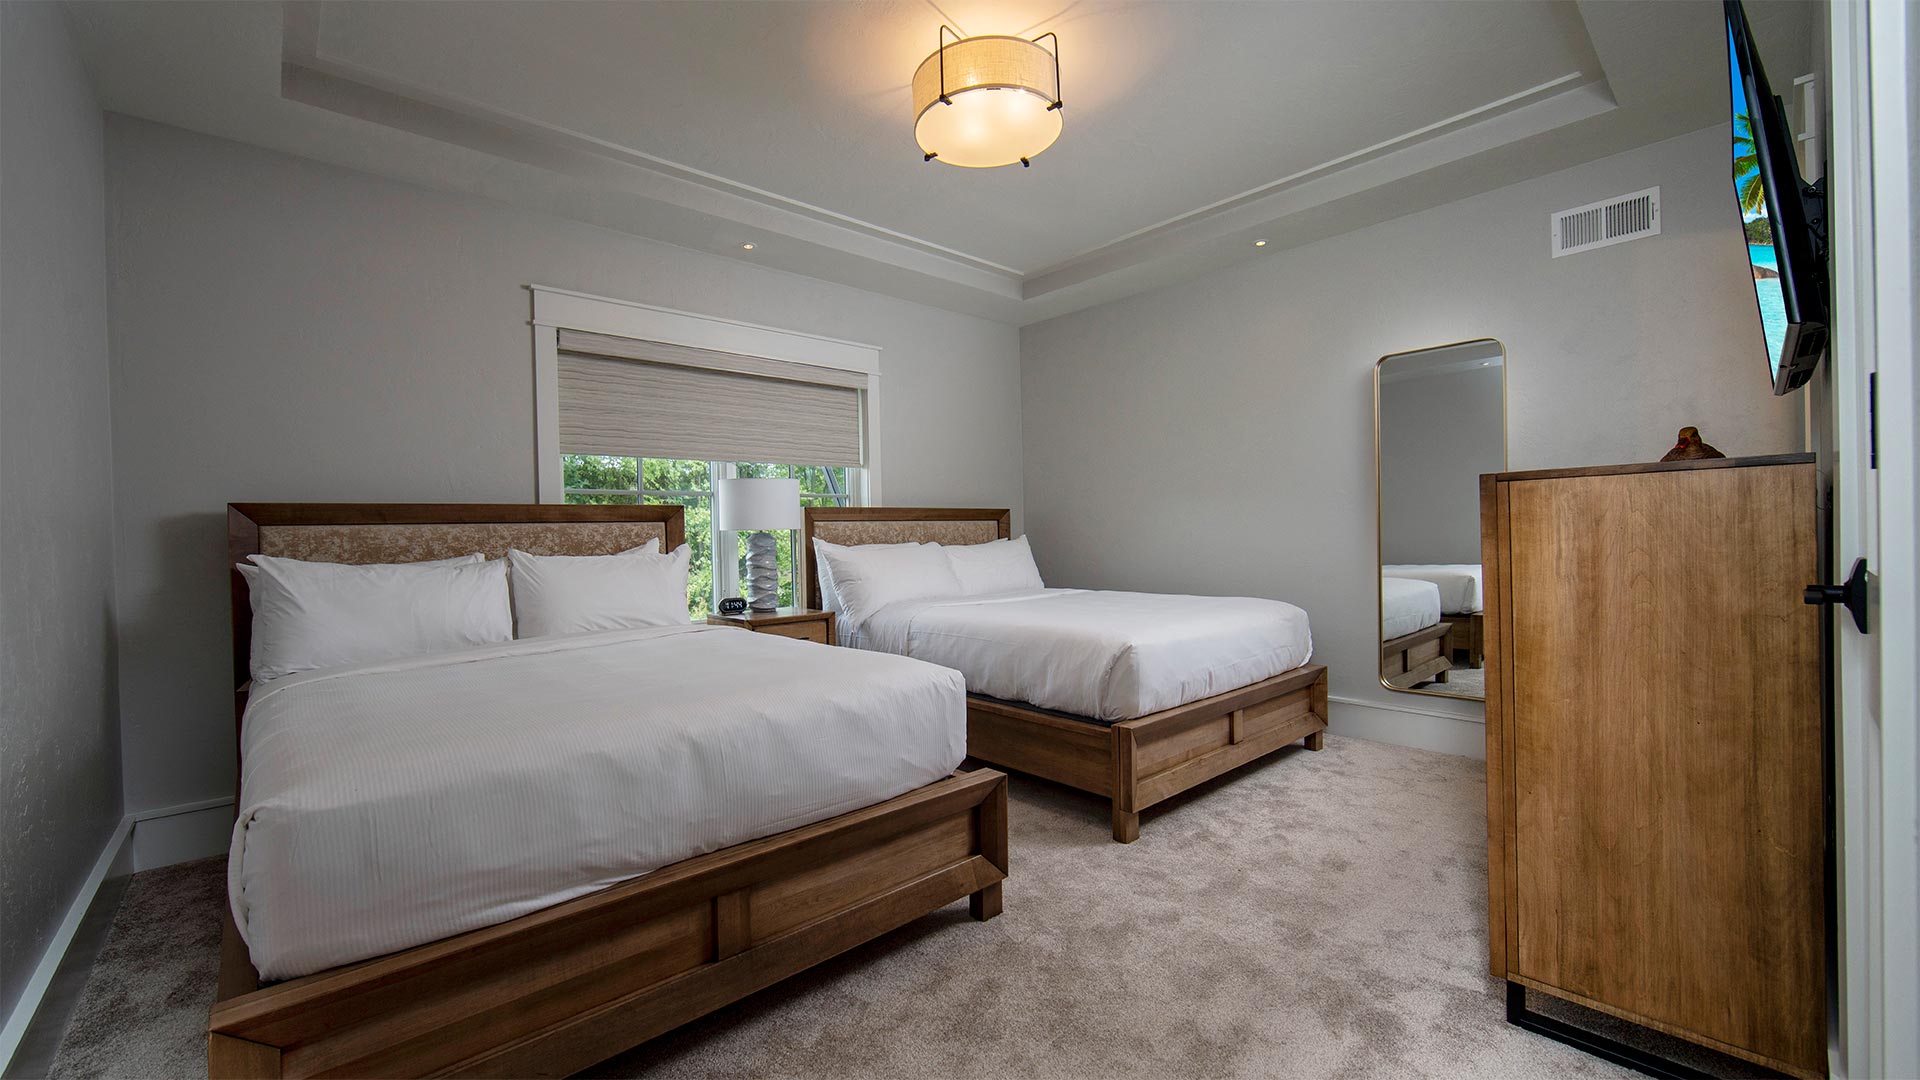 interior shot of a bedroom with two queen beds. Each bed has all white linens and wooden headboard. There is a dresser with a tv mounted overhead across from the beds